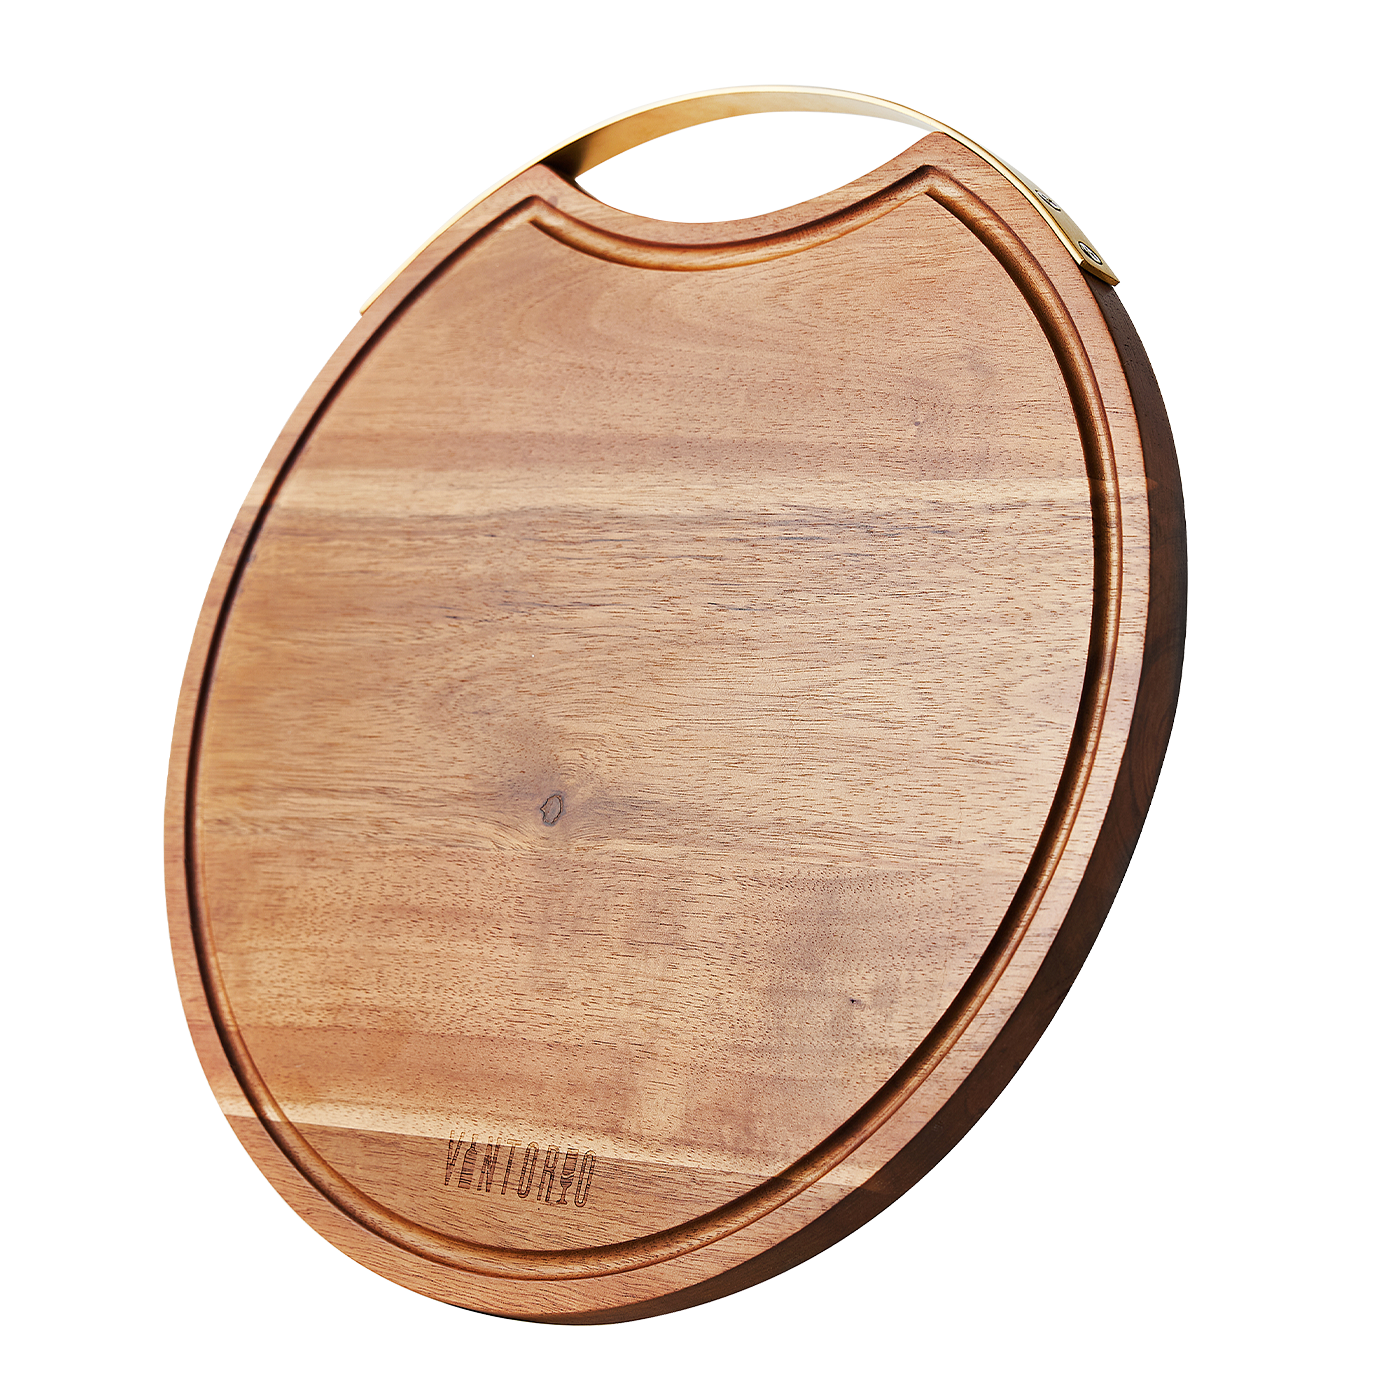 Vintorio Wood Cheese Board with Handle